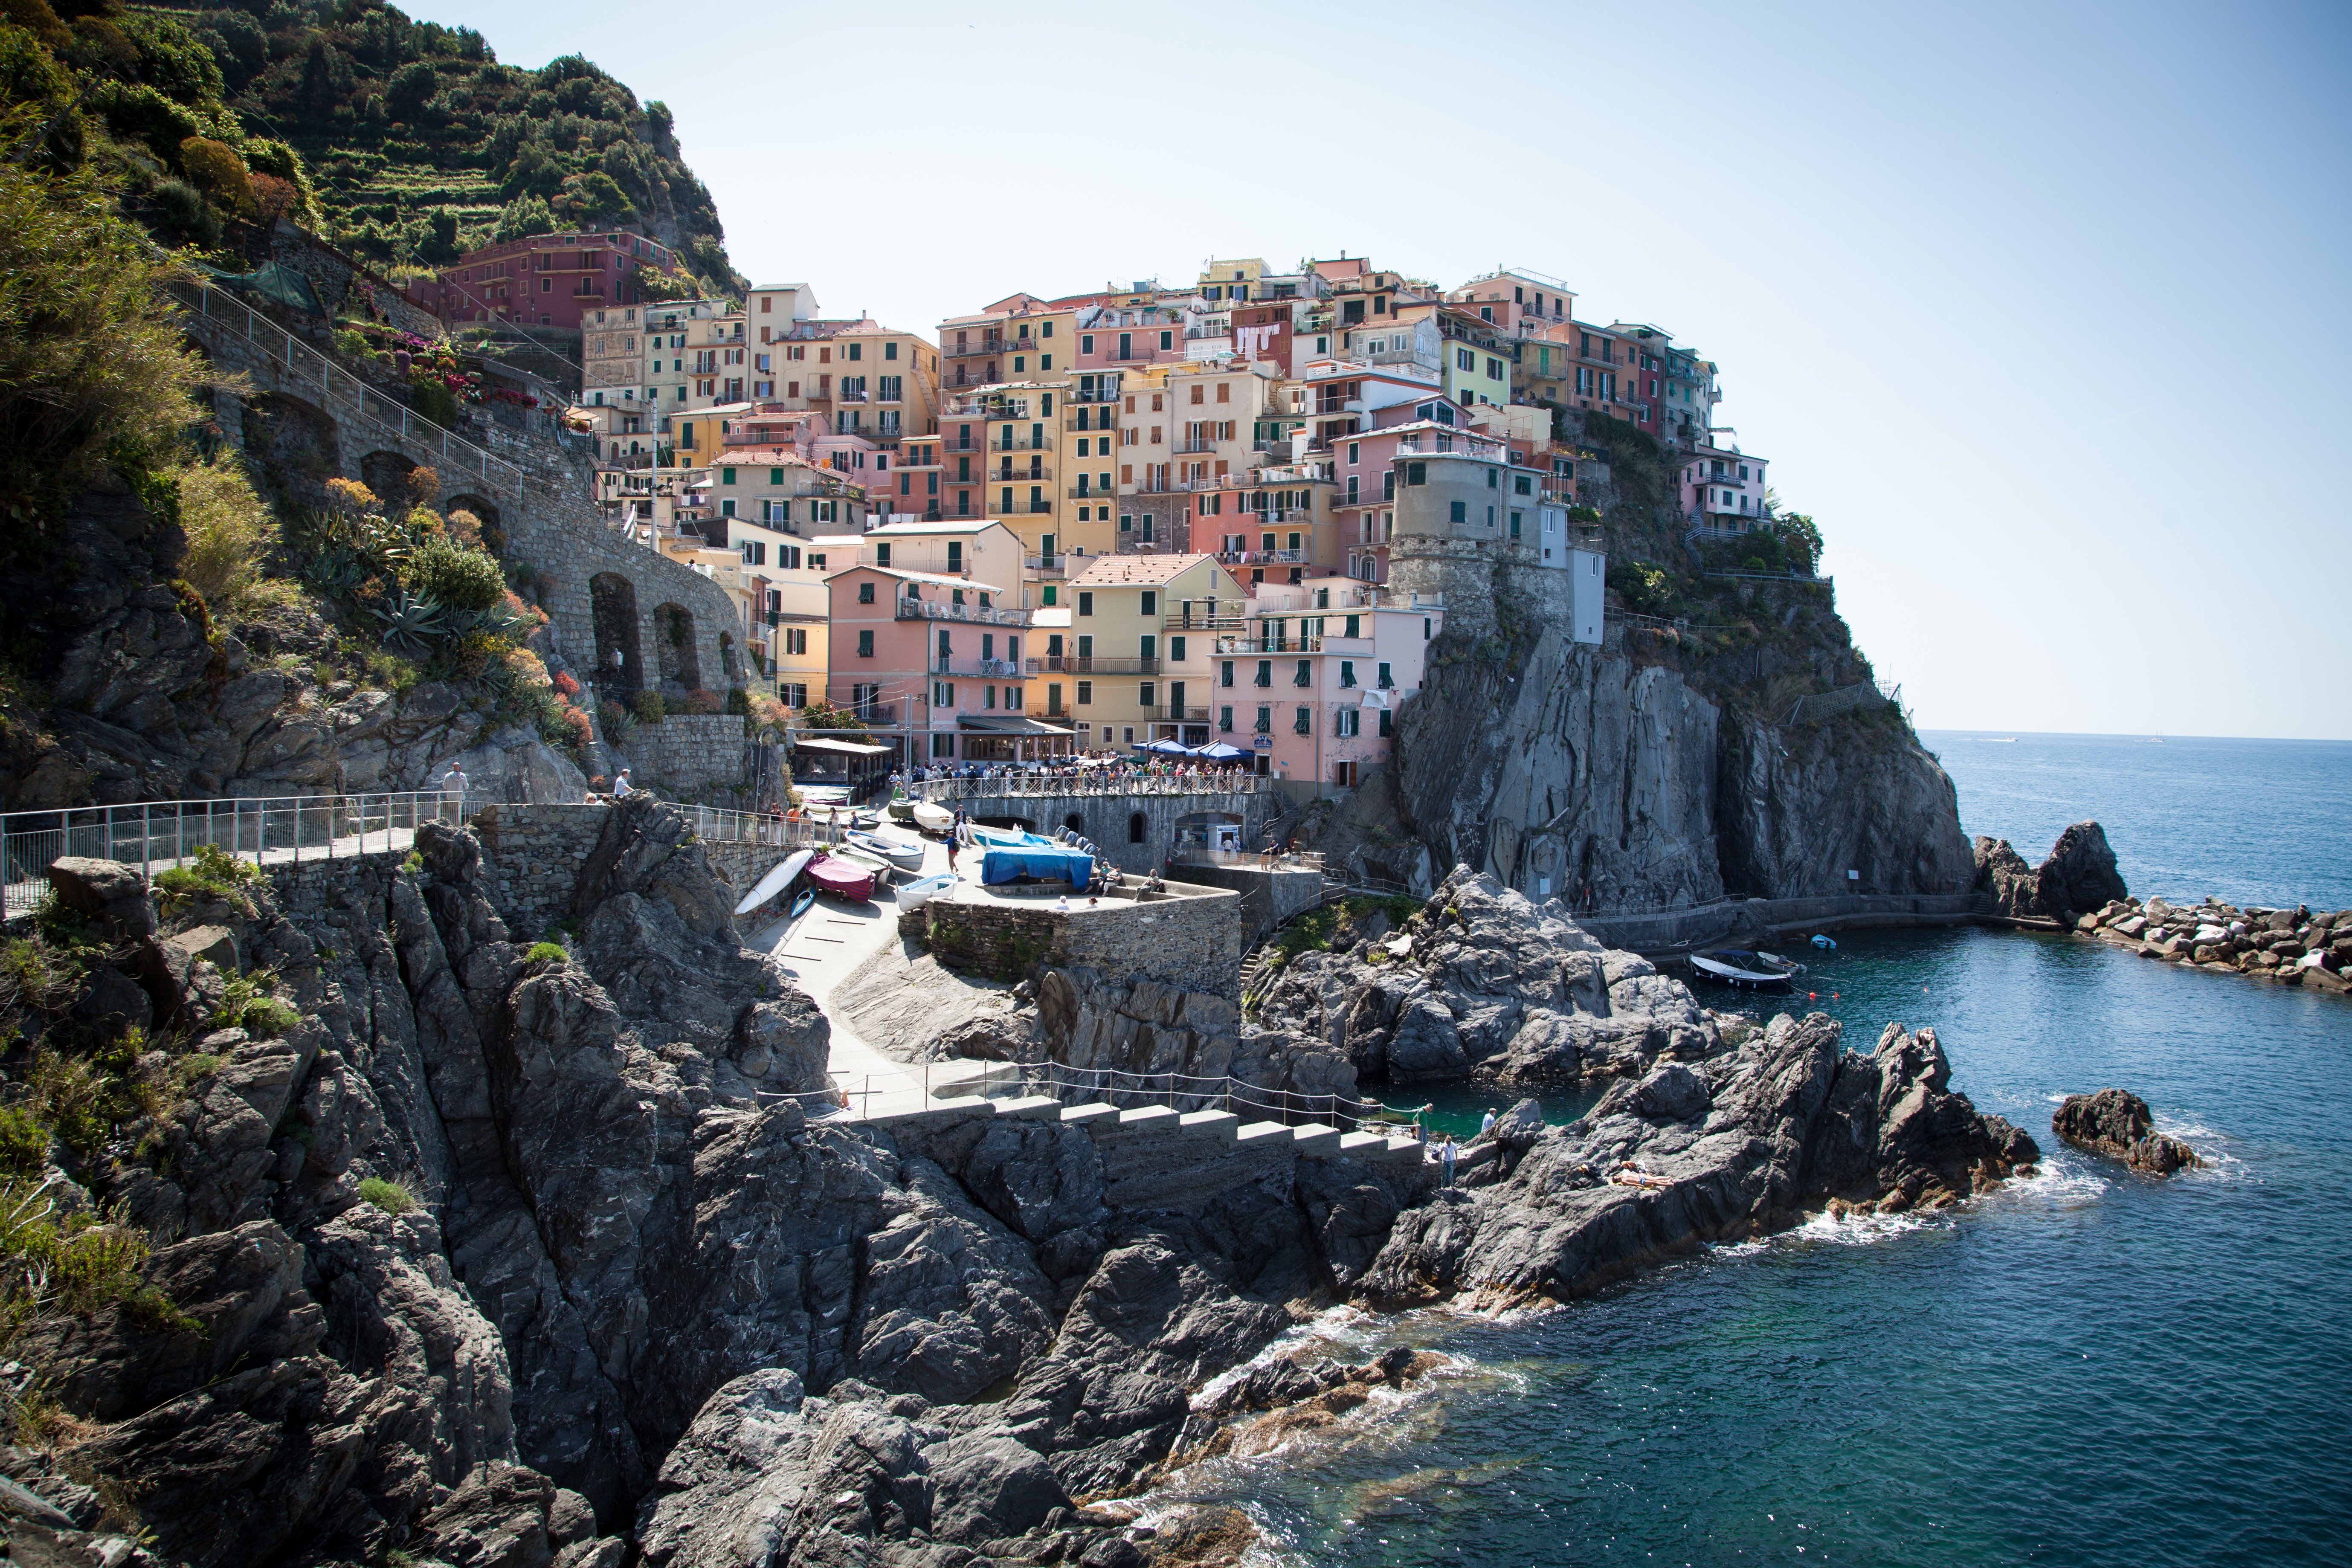 Manarola, in the Cinque Terre, a string of centuries-old villages on the Italian Riviera. Picture: Gary Jones